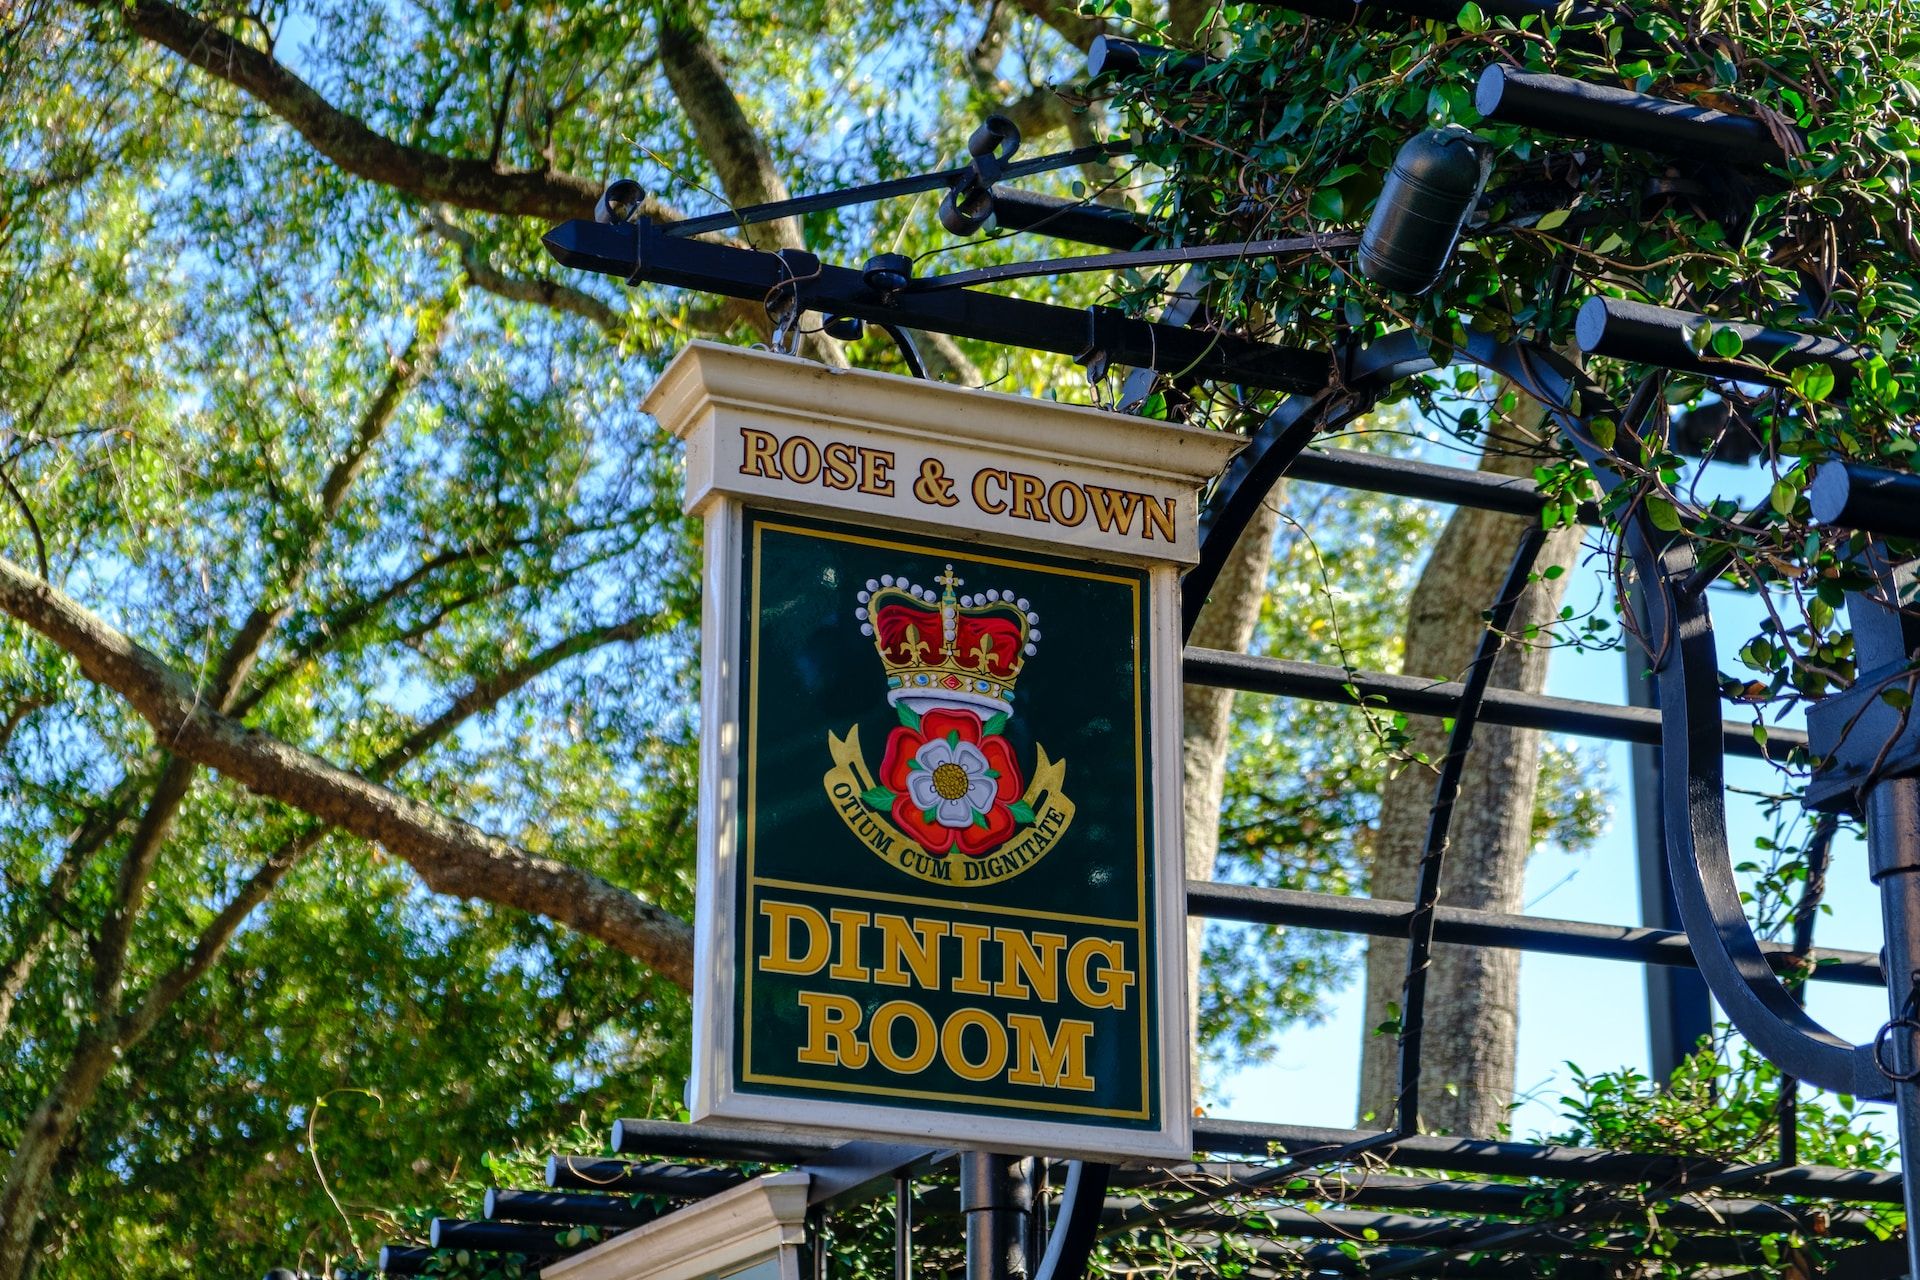 Entrance To The Rose & Crown Dining Room From At Walt Disney World, Orlando, Florida, USA